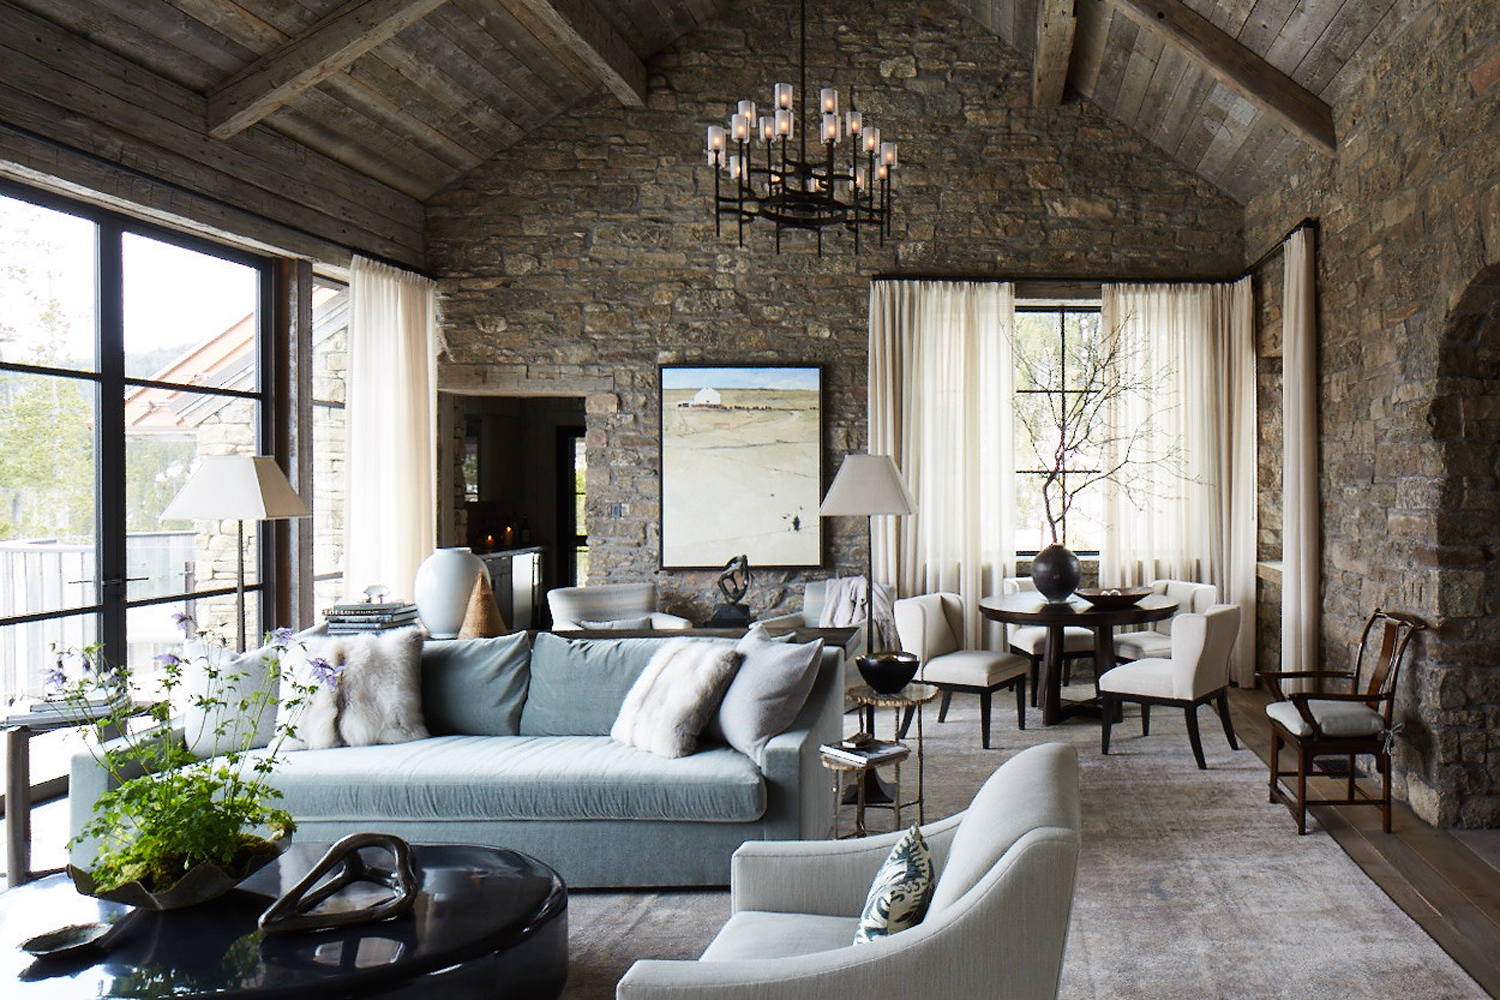 WRJ Design incorporated subtle layers of color and texture to create a livable elegance that embraces the Yellowstone Club home’s mountain setting (photo by William Abranowicz).